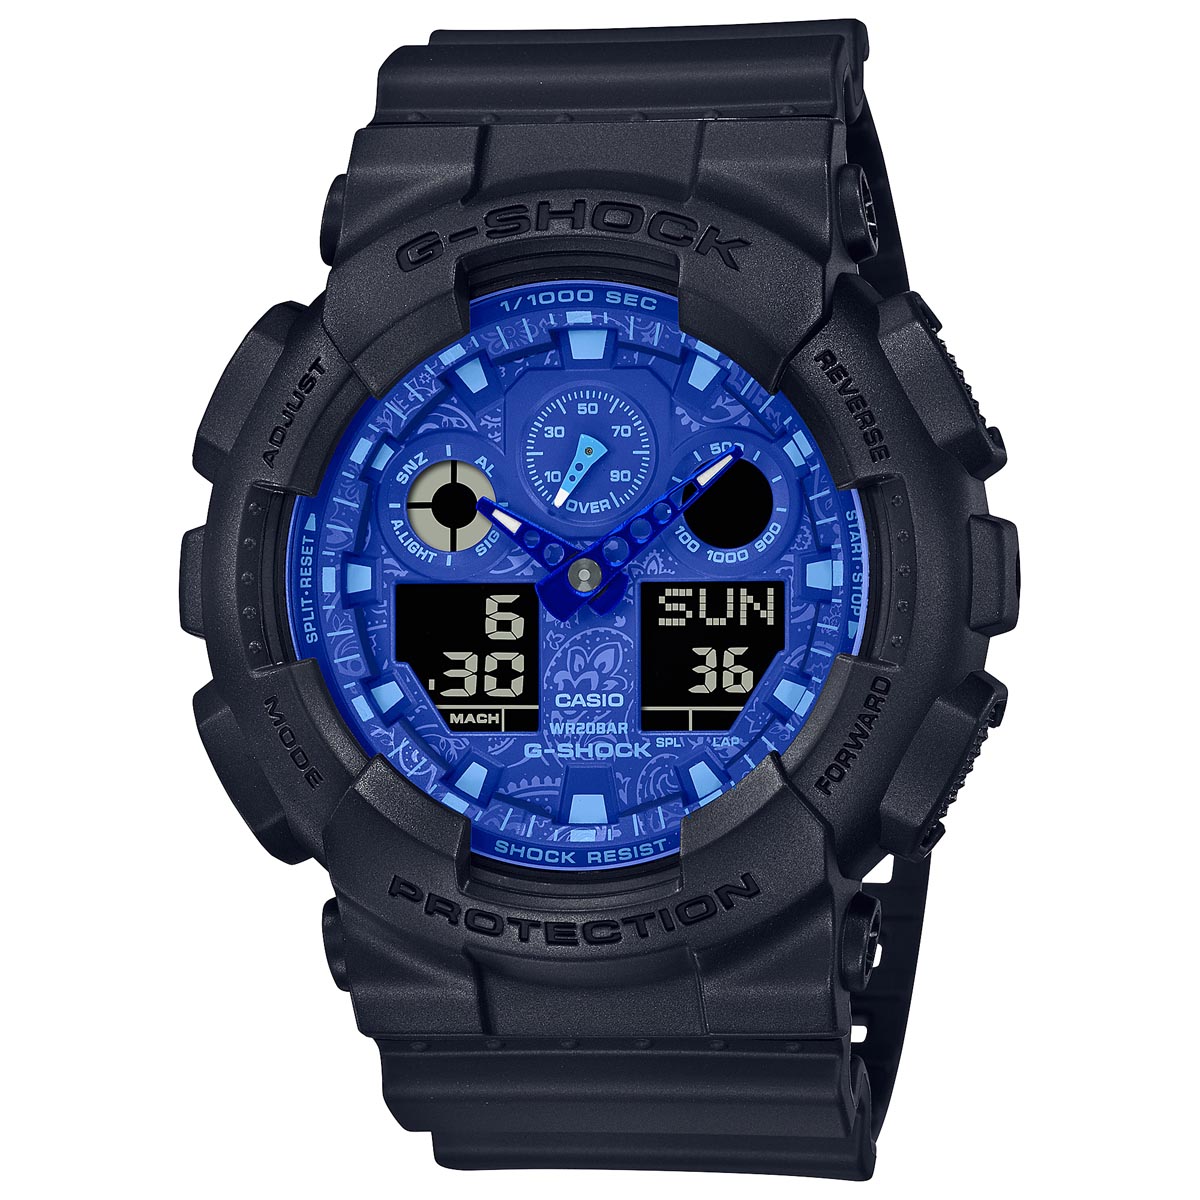 G Shock Limited Edition Mens Watch with Blue Paisley Dial and Black Resin Strap (quartz movement)